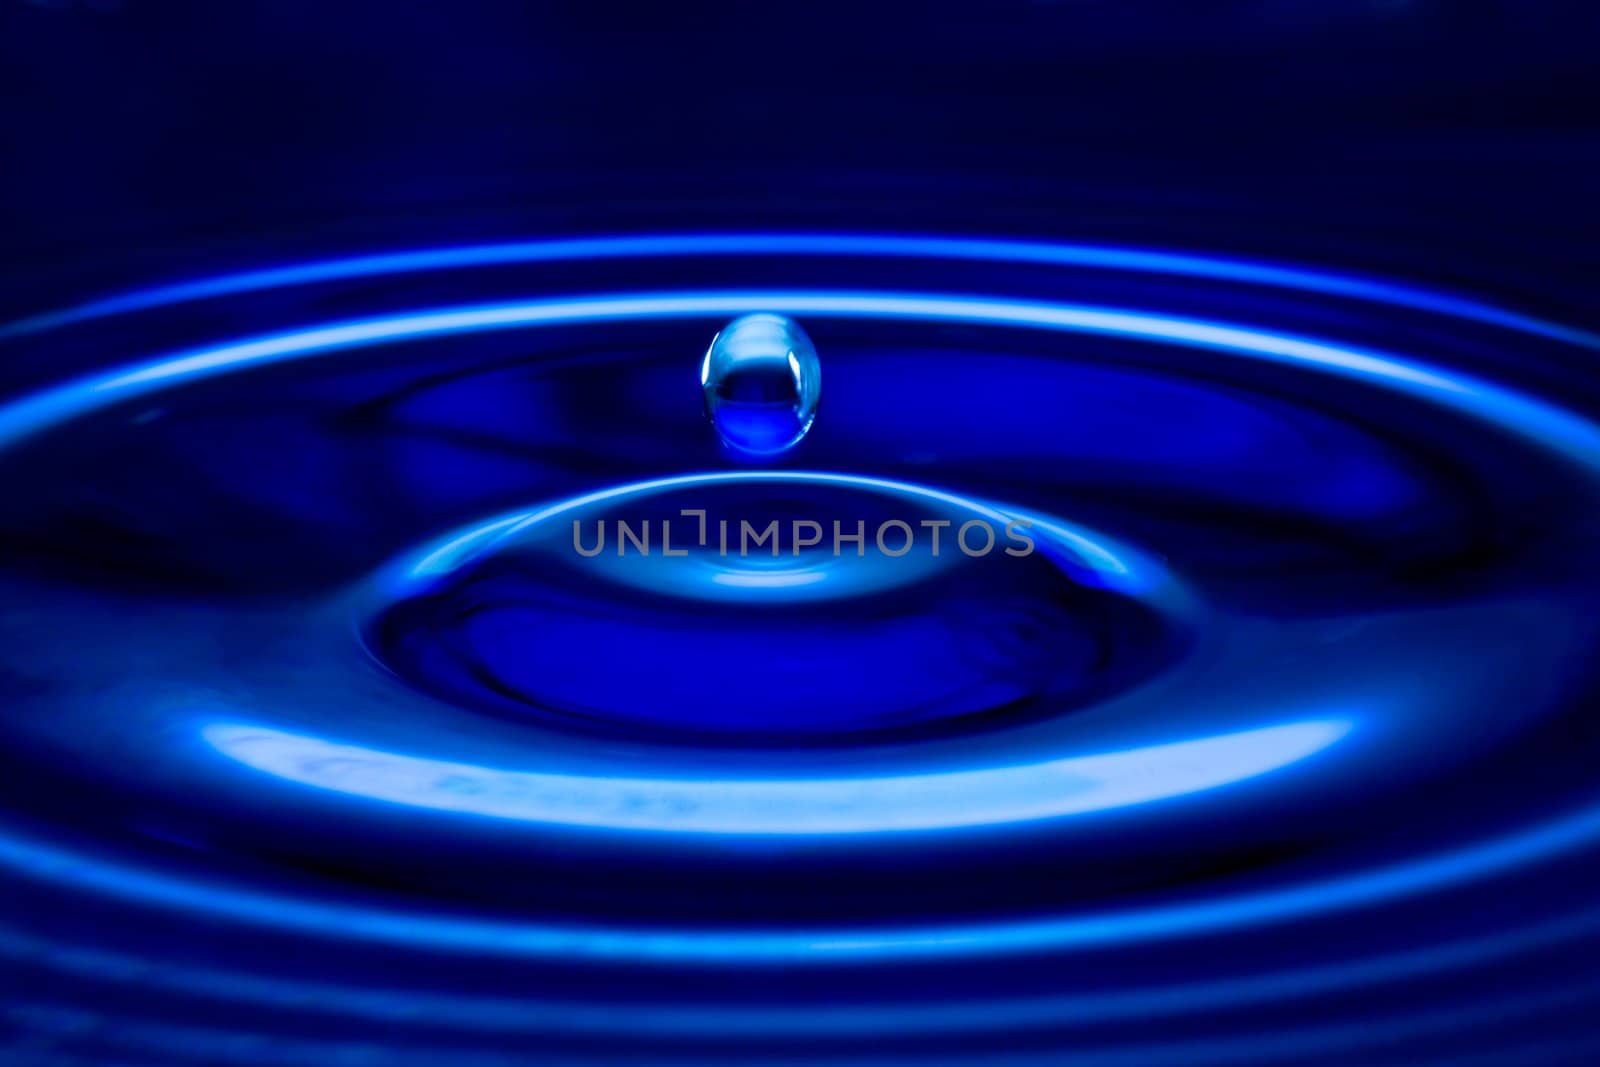 Shining drop of water by Gravicapa